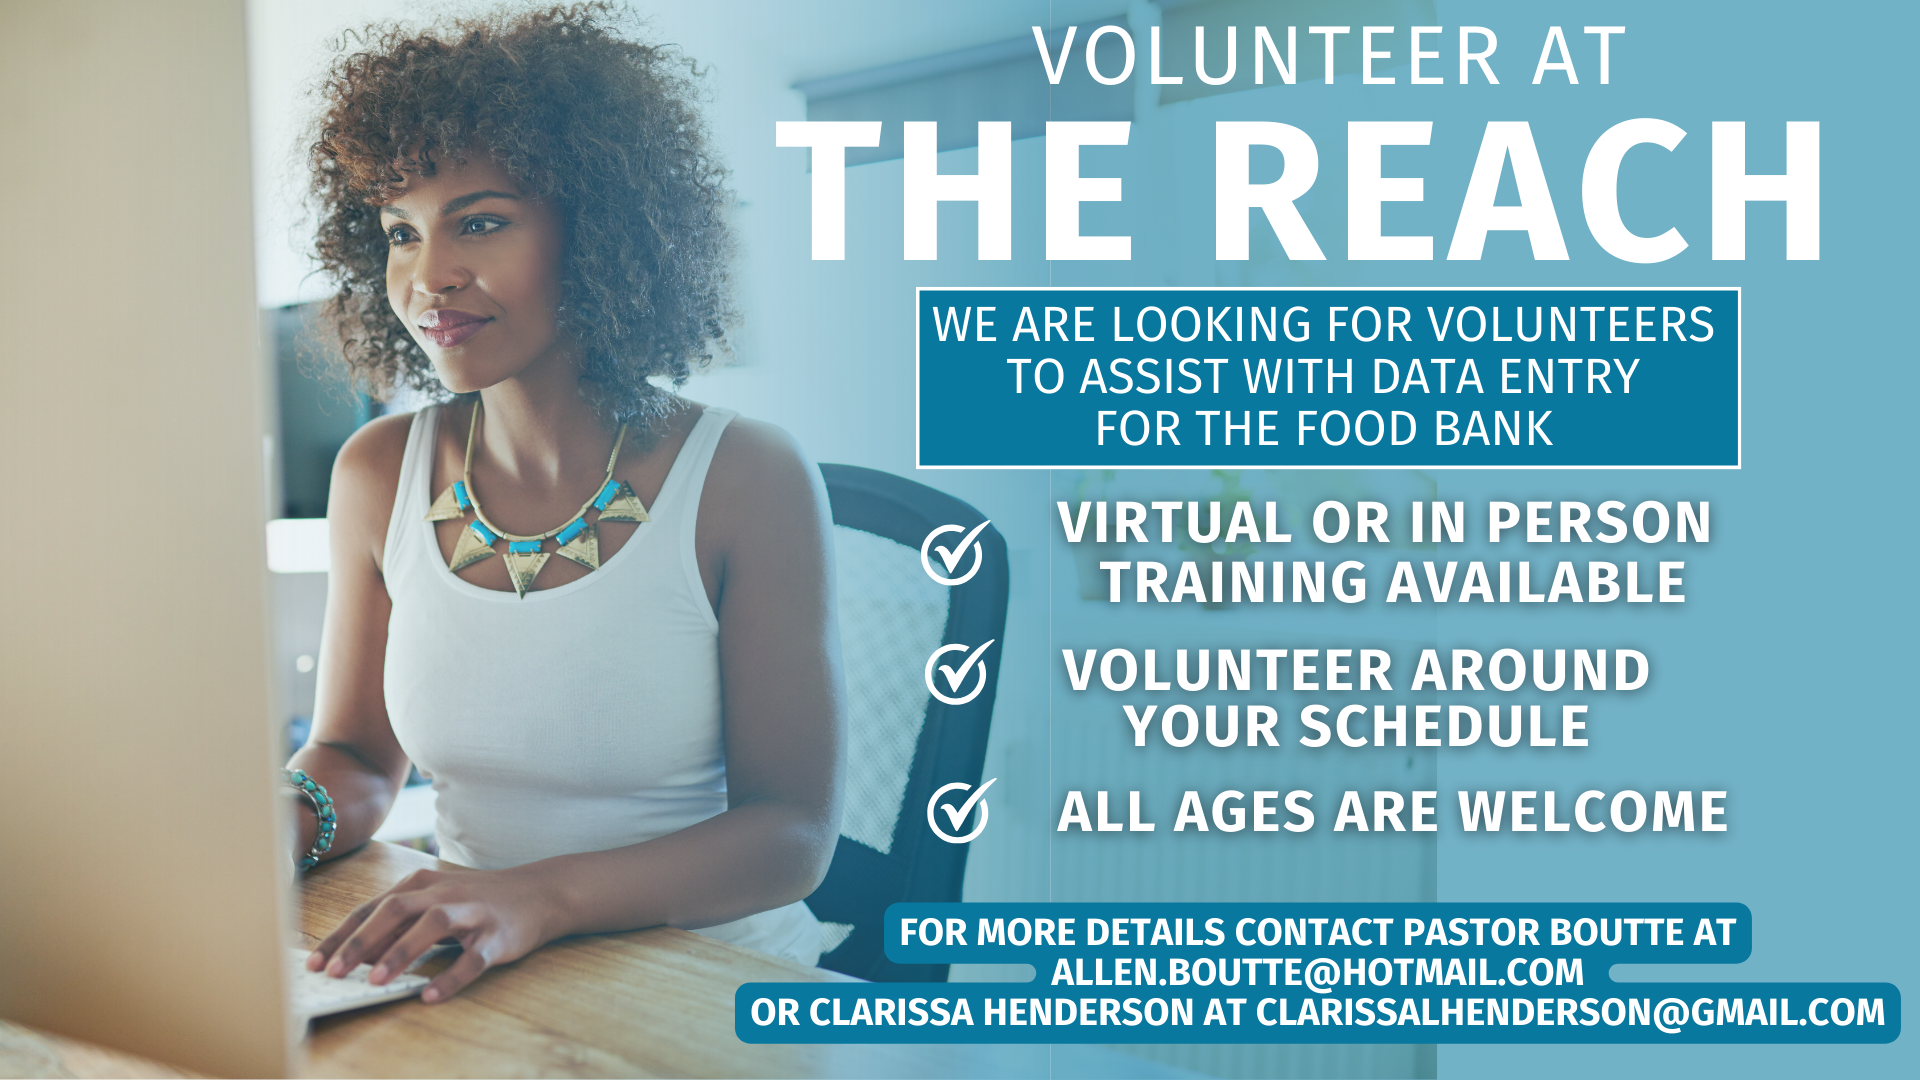 Volunteer With The Reach head image